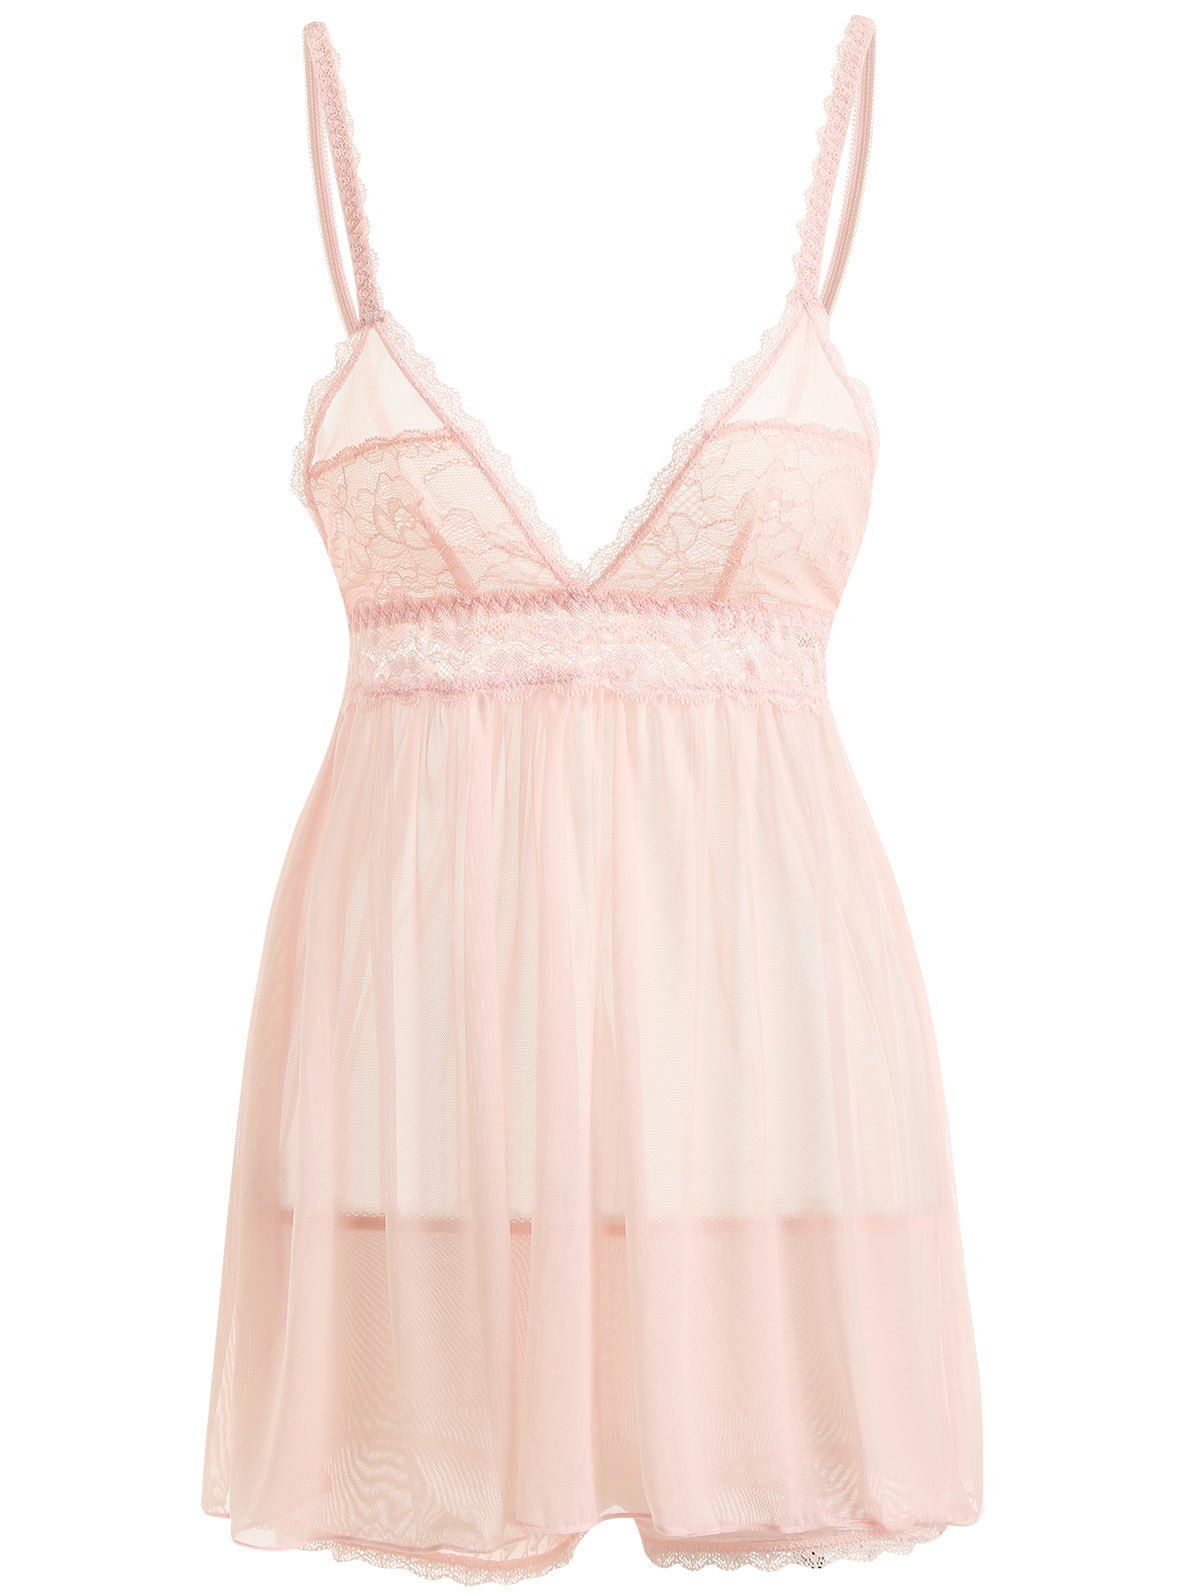 [17% OFF] 2022 Sheer Mesh Slip Babydoll With Lace In LIGHT PINK | DressLily